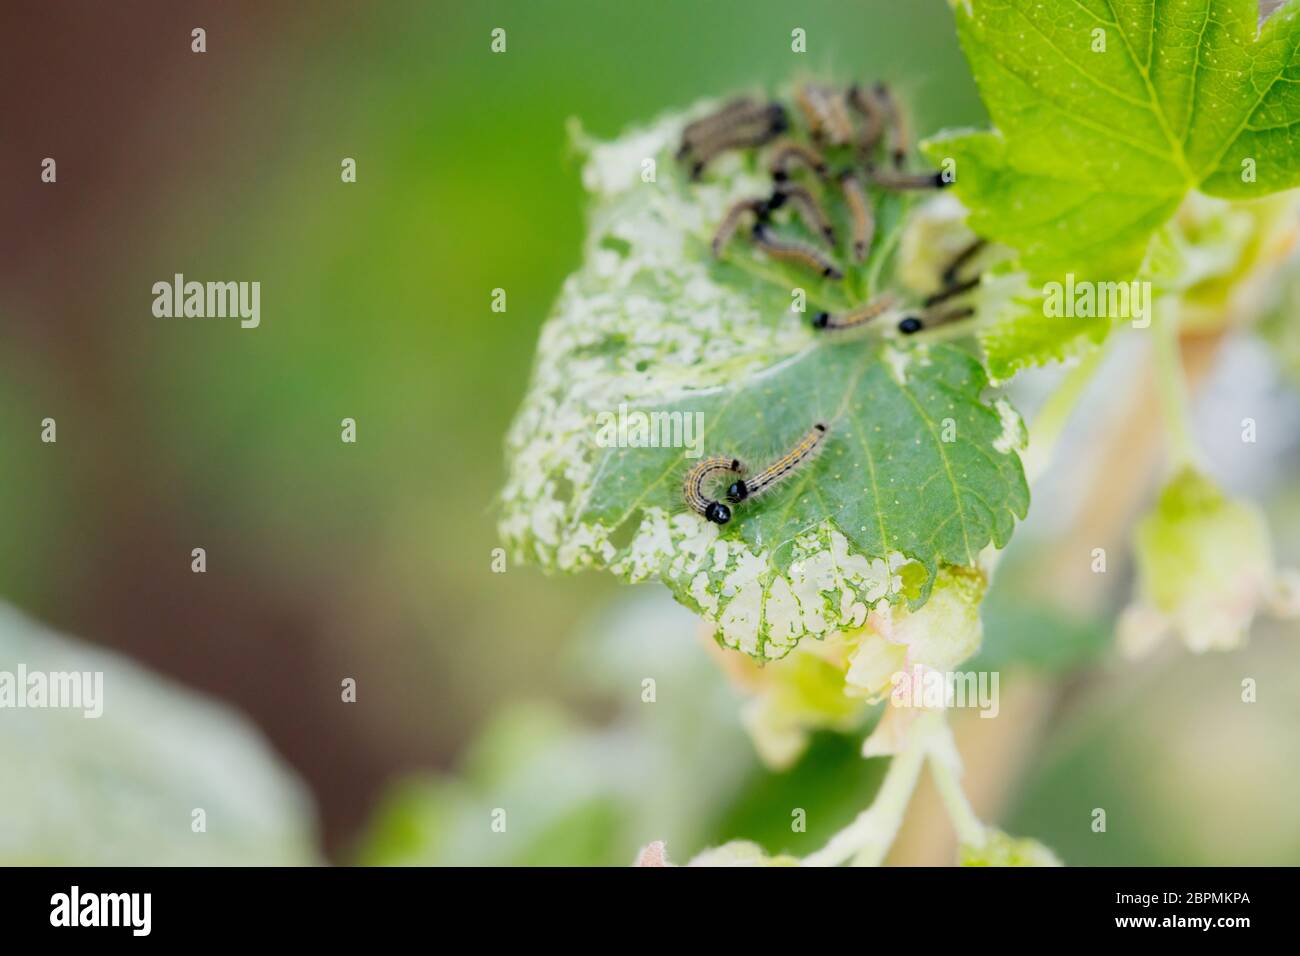 Currant pests on the leaves of plants in the garden, selective focus, macro photo Stock Photo